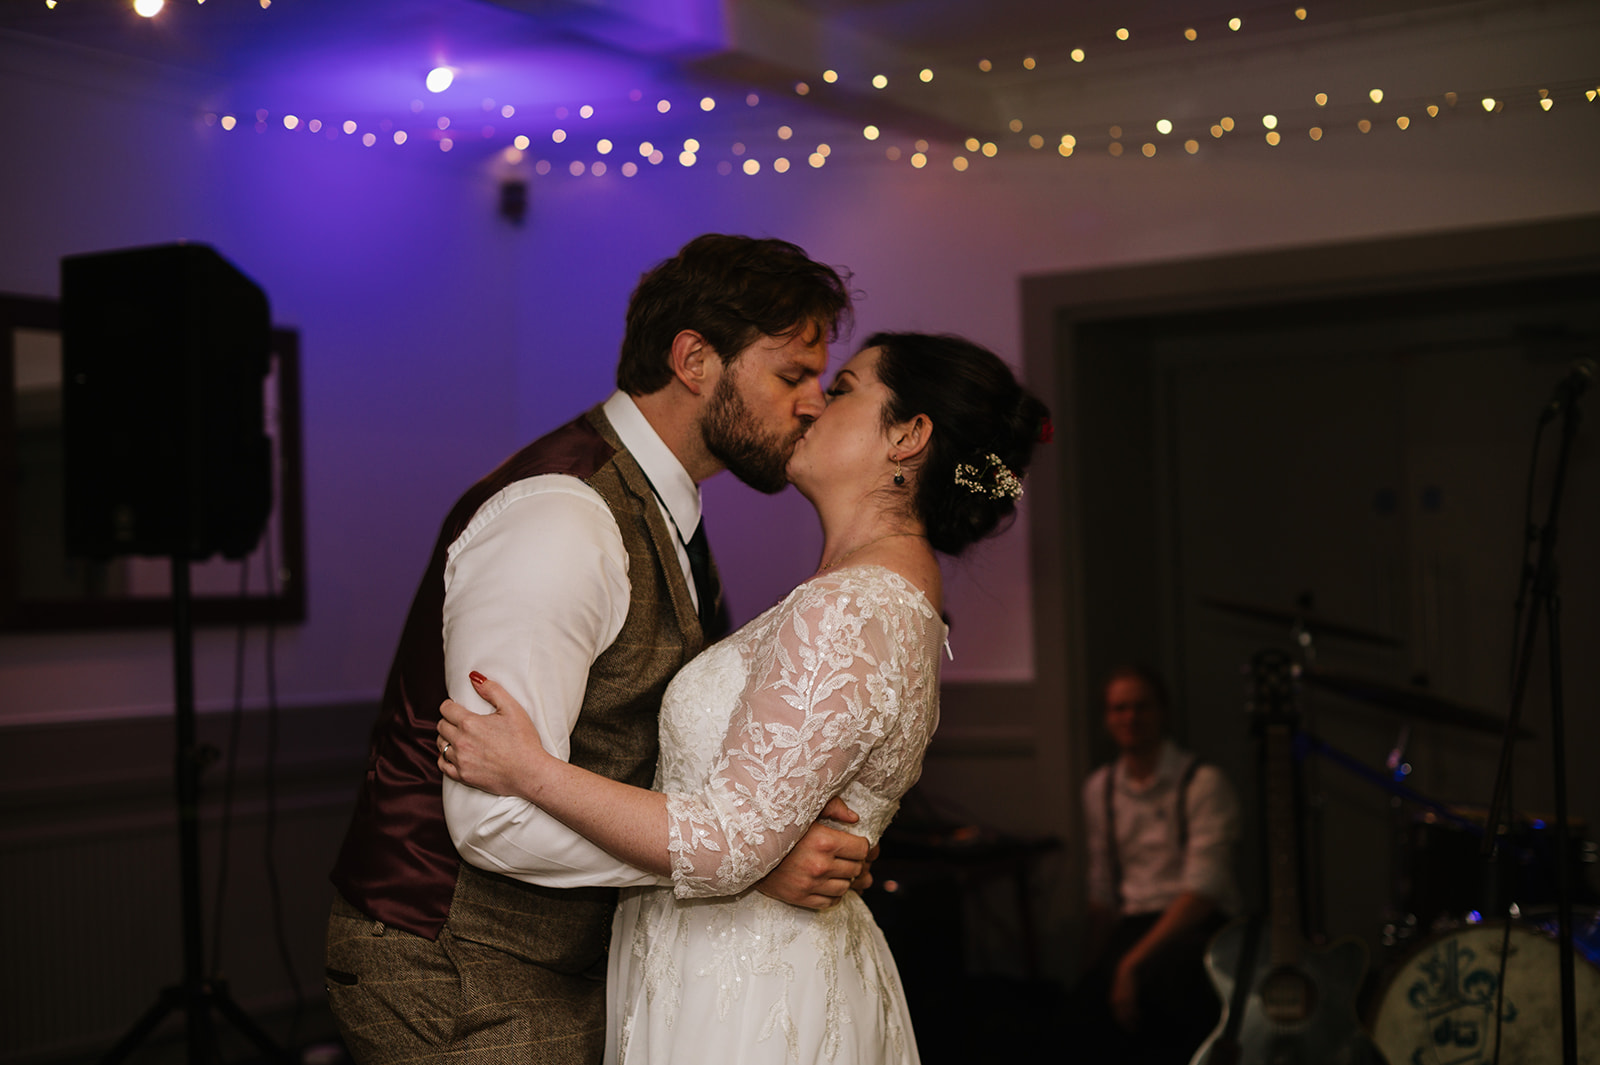 The first dance at Whirlowbrook Hall wedding in Sheffield